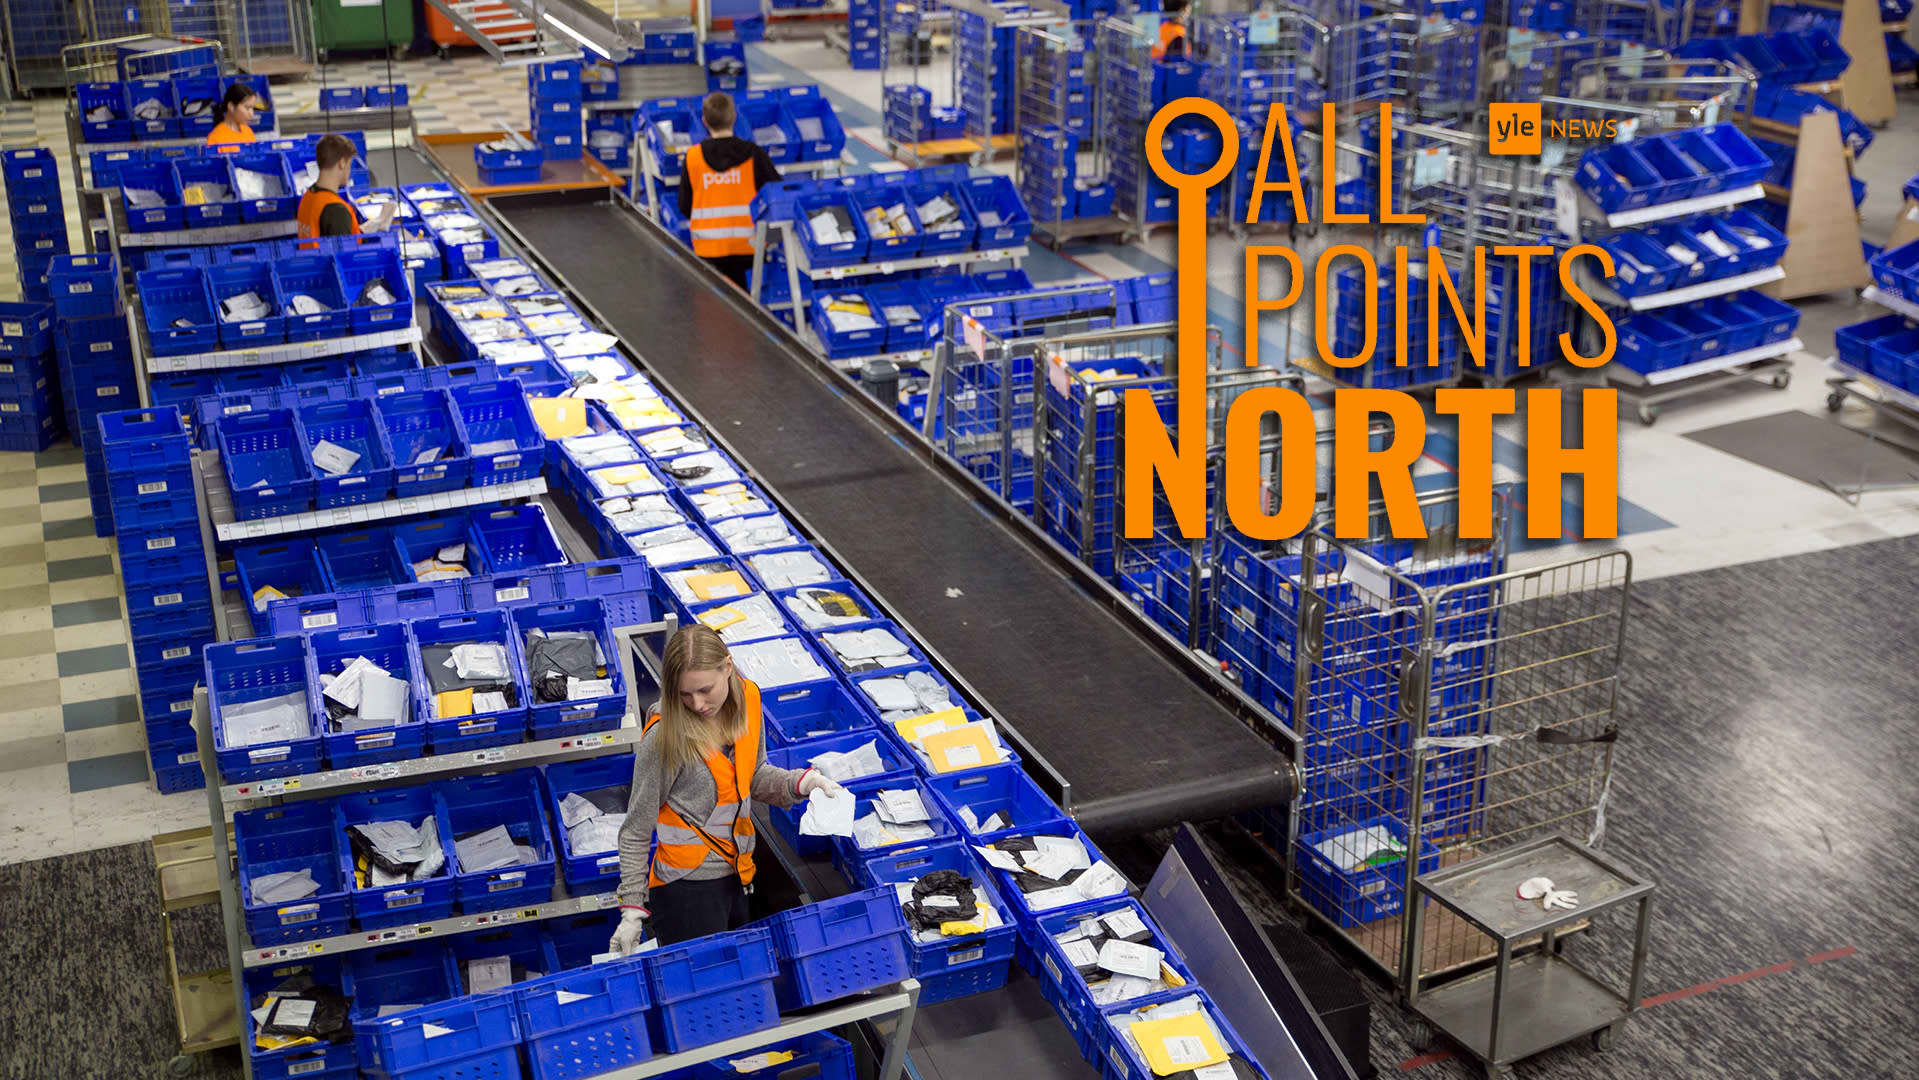 Photo of Posti logistics facility, featuring the All Points North podcast logo.